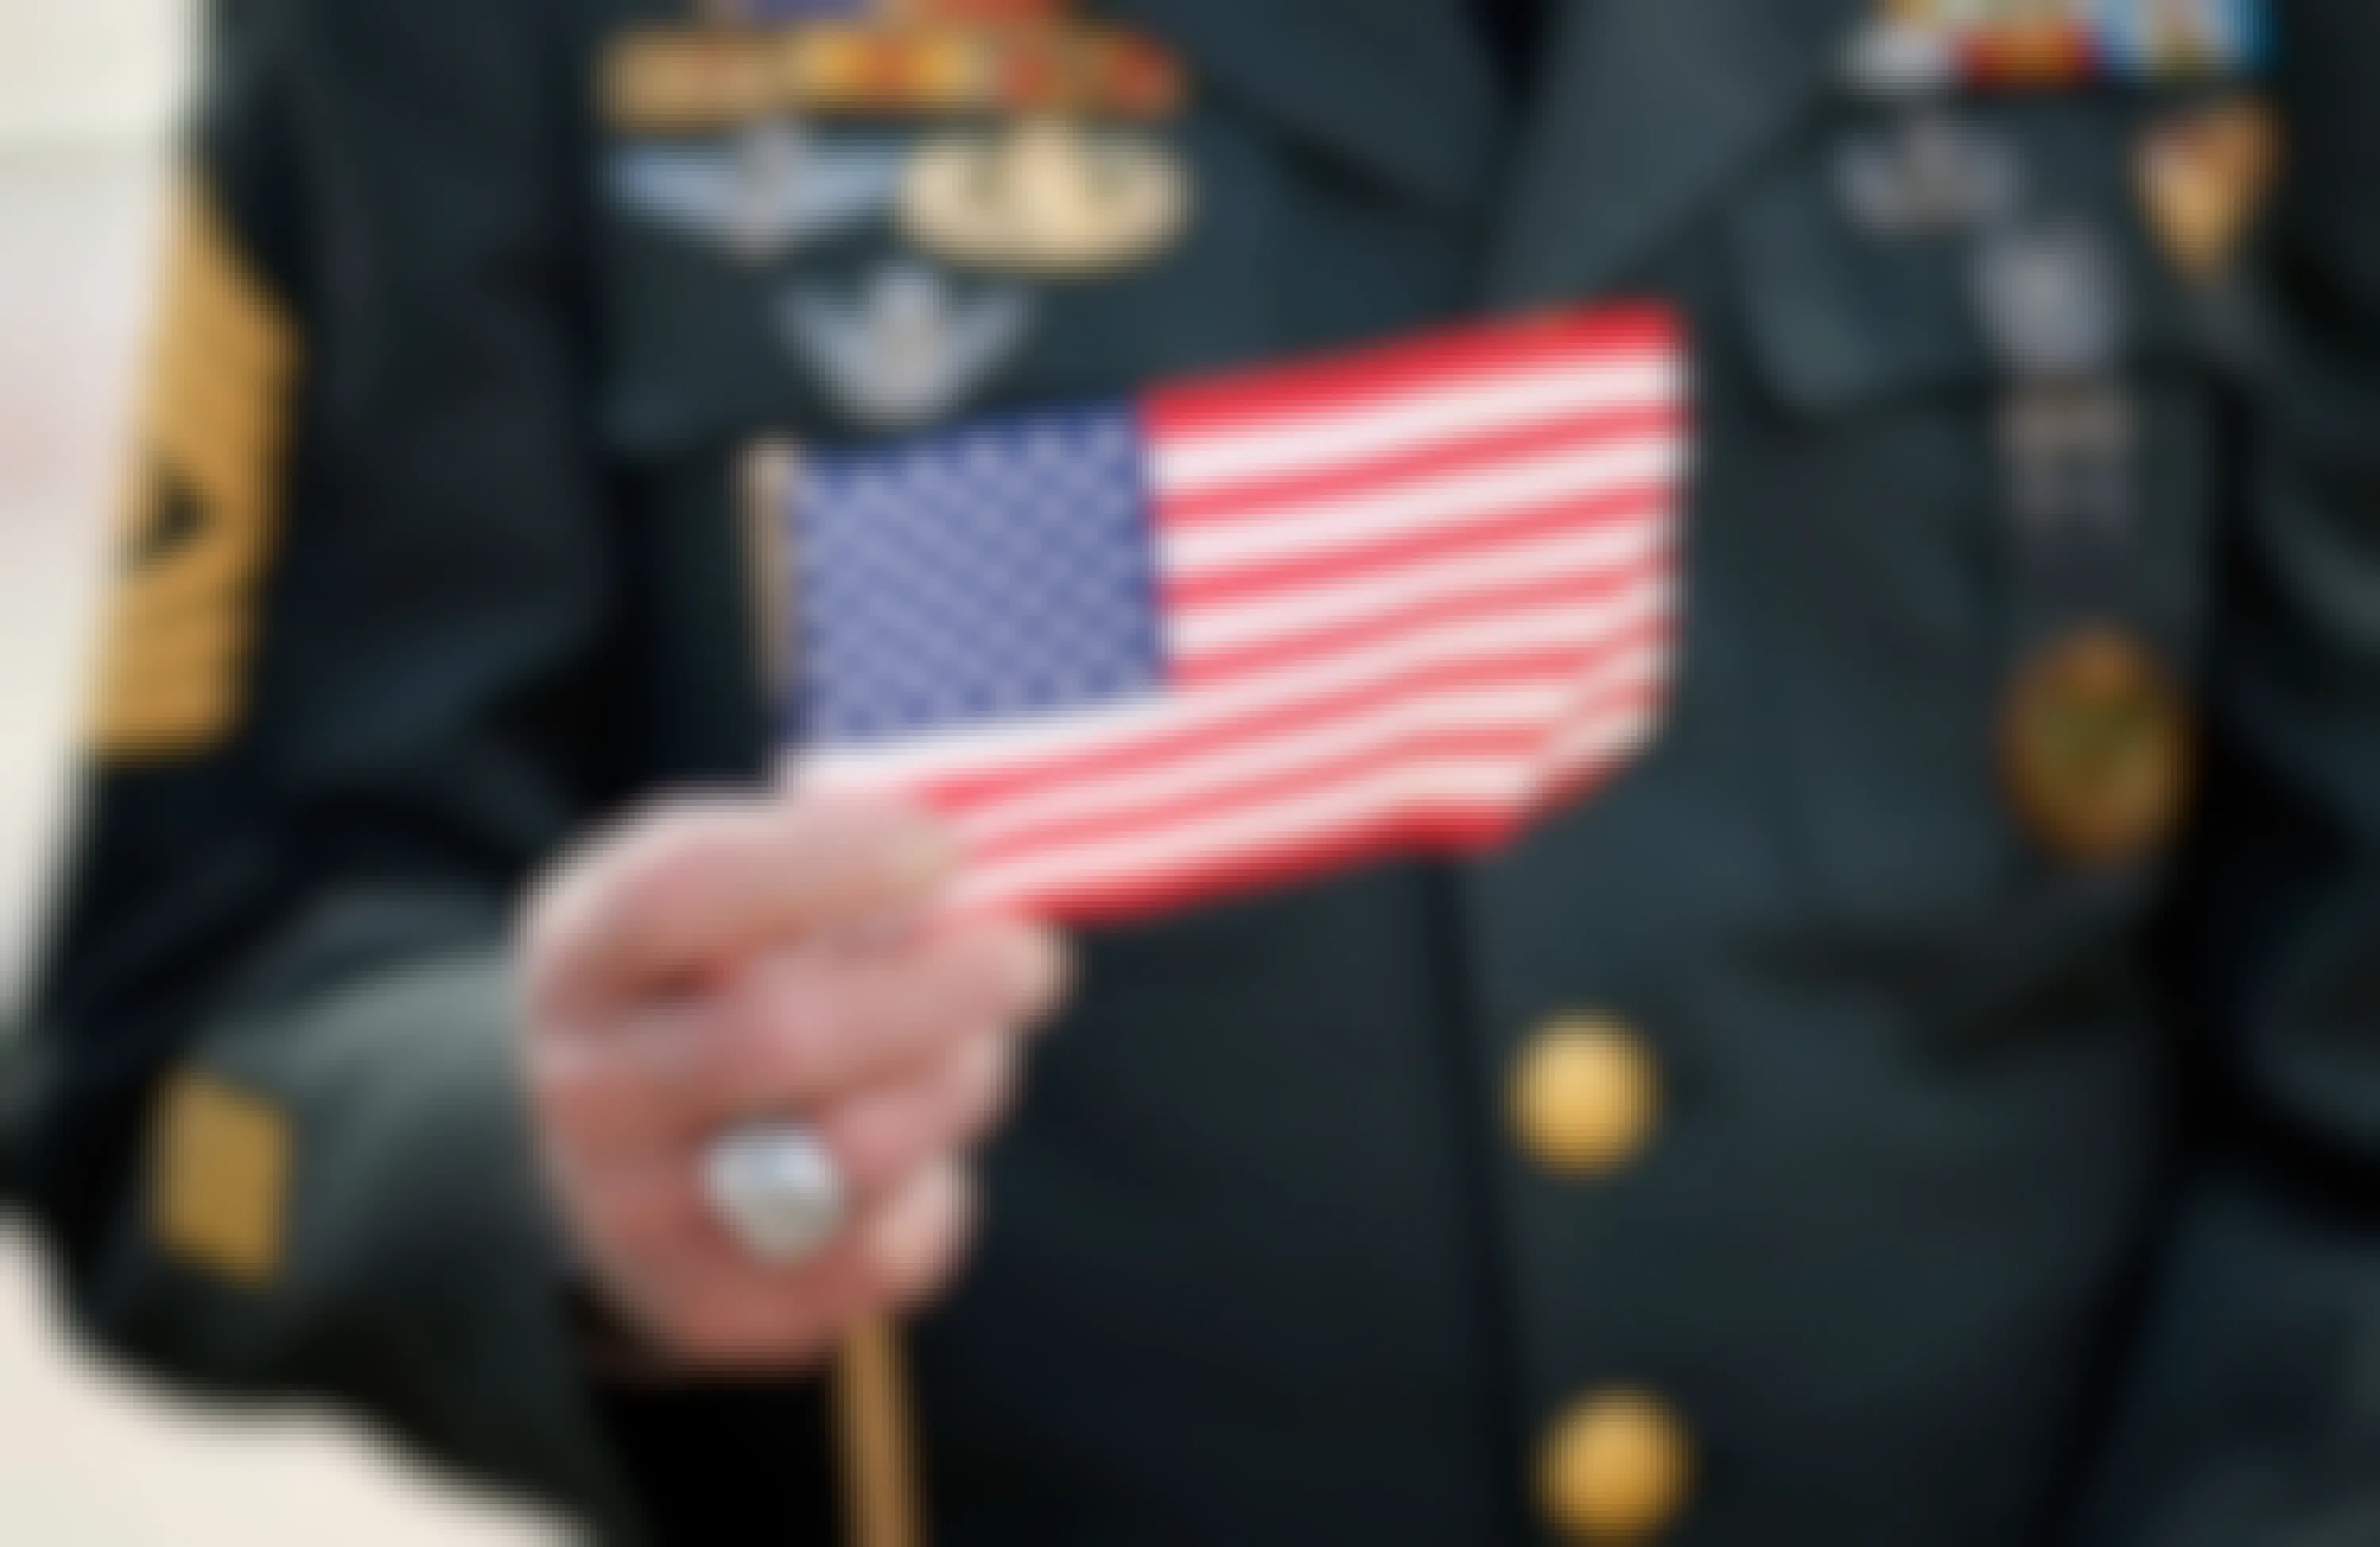 A small American flag being held up by a military veteran in uniform.